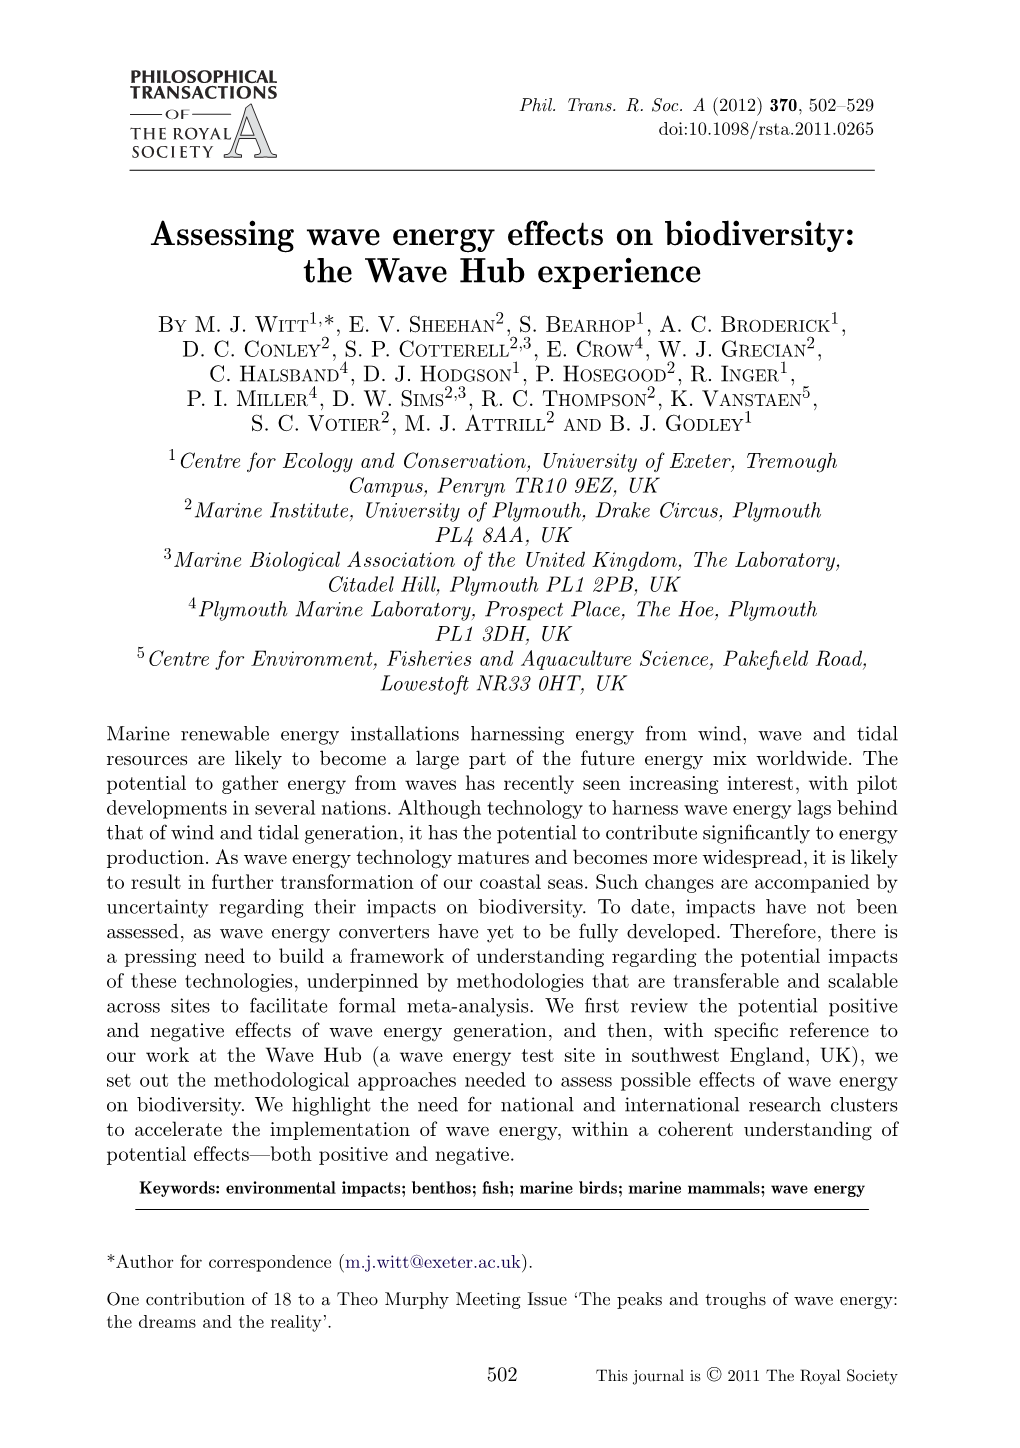 Assessing Wave Energy Effects on Biodiversity: the Wave Hub Experience